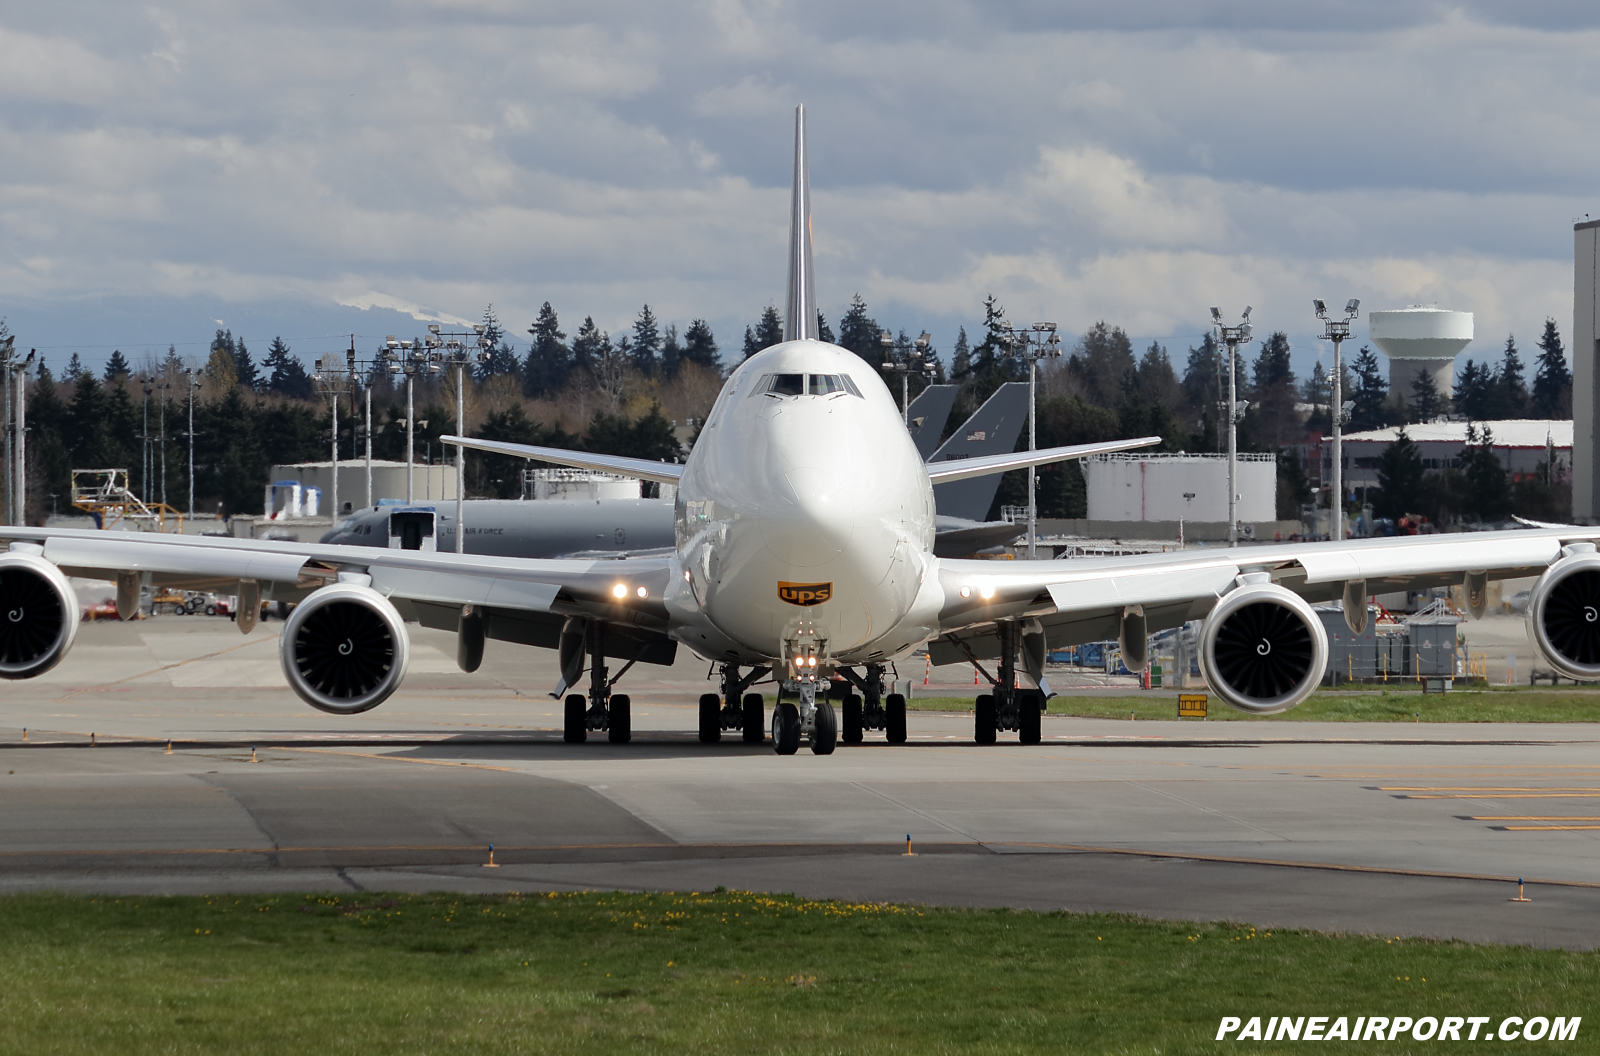 UPS 747-8F N633UP at KPAE Paine Field